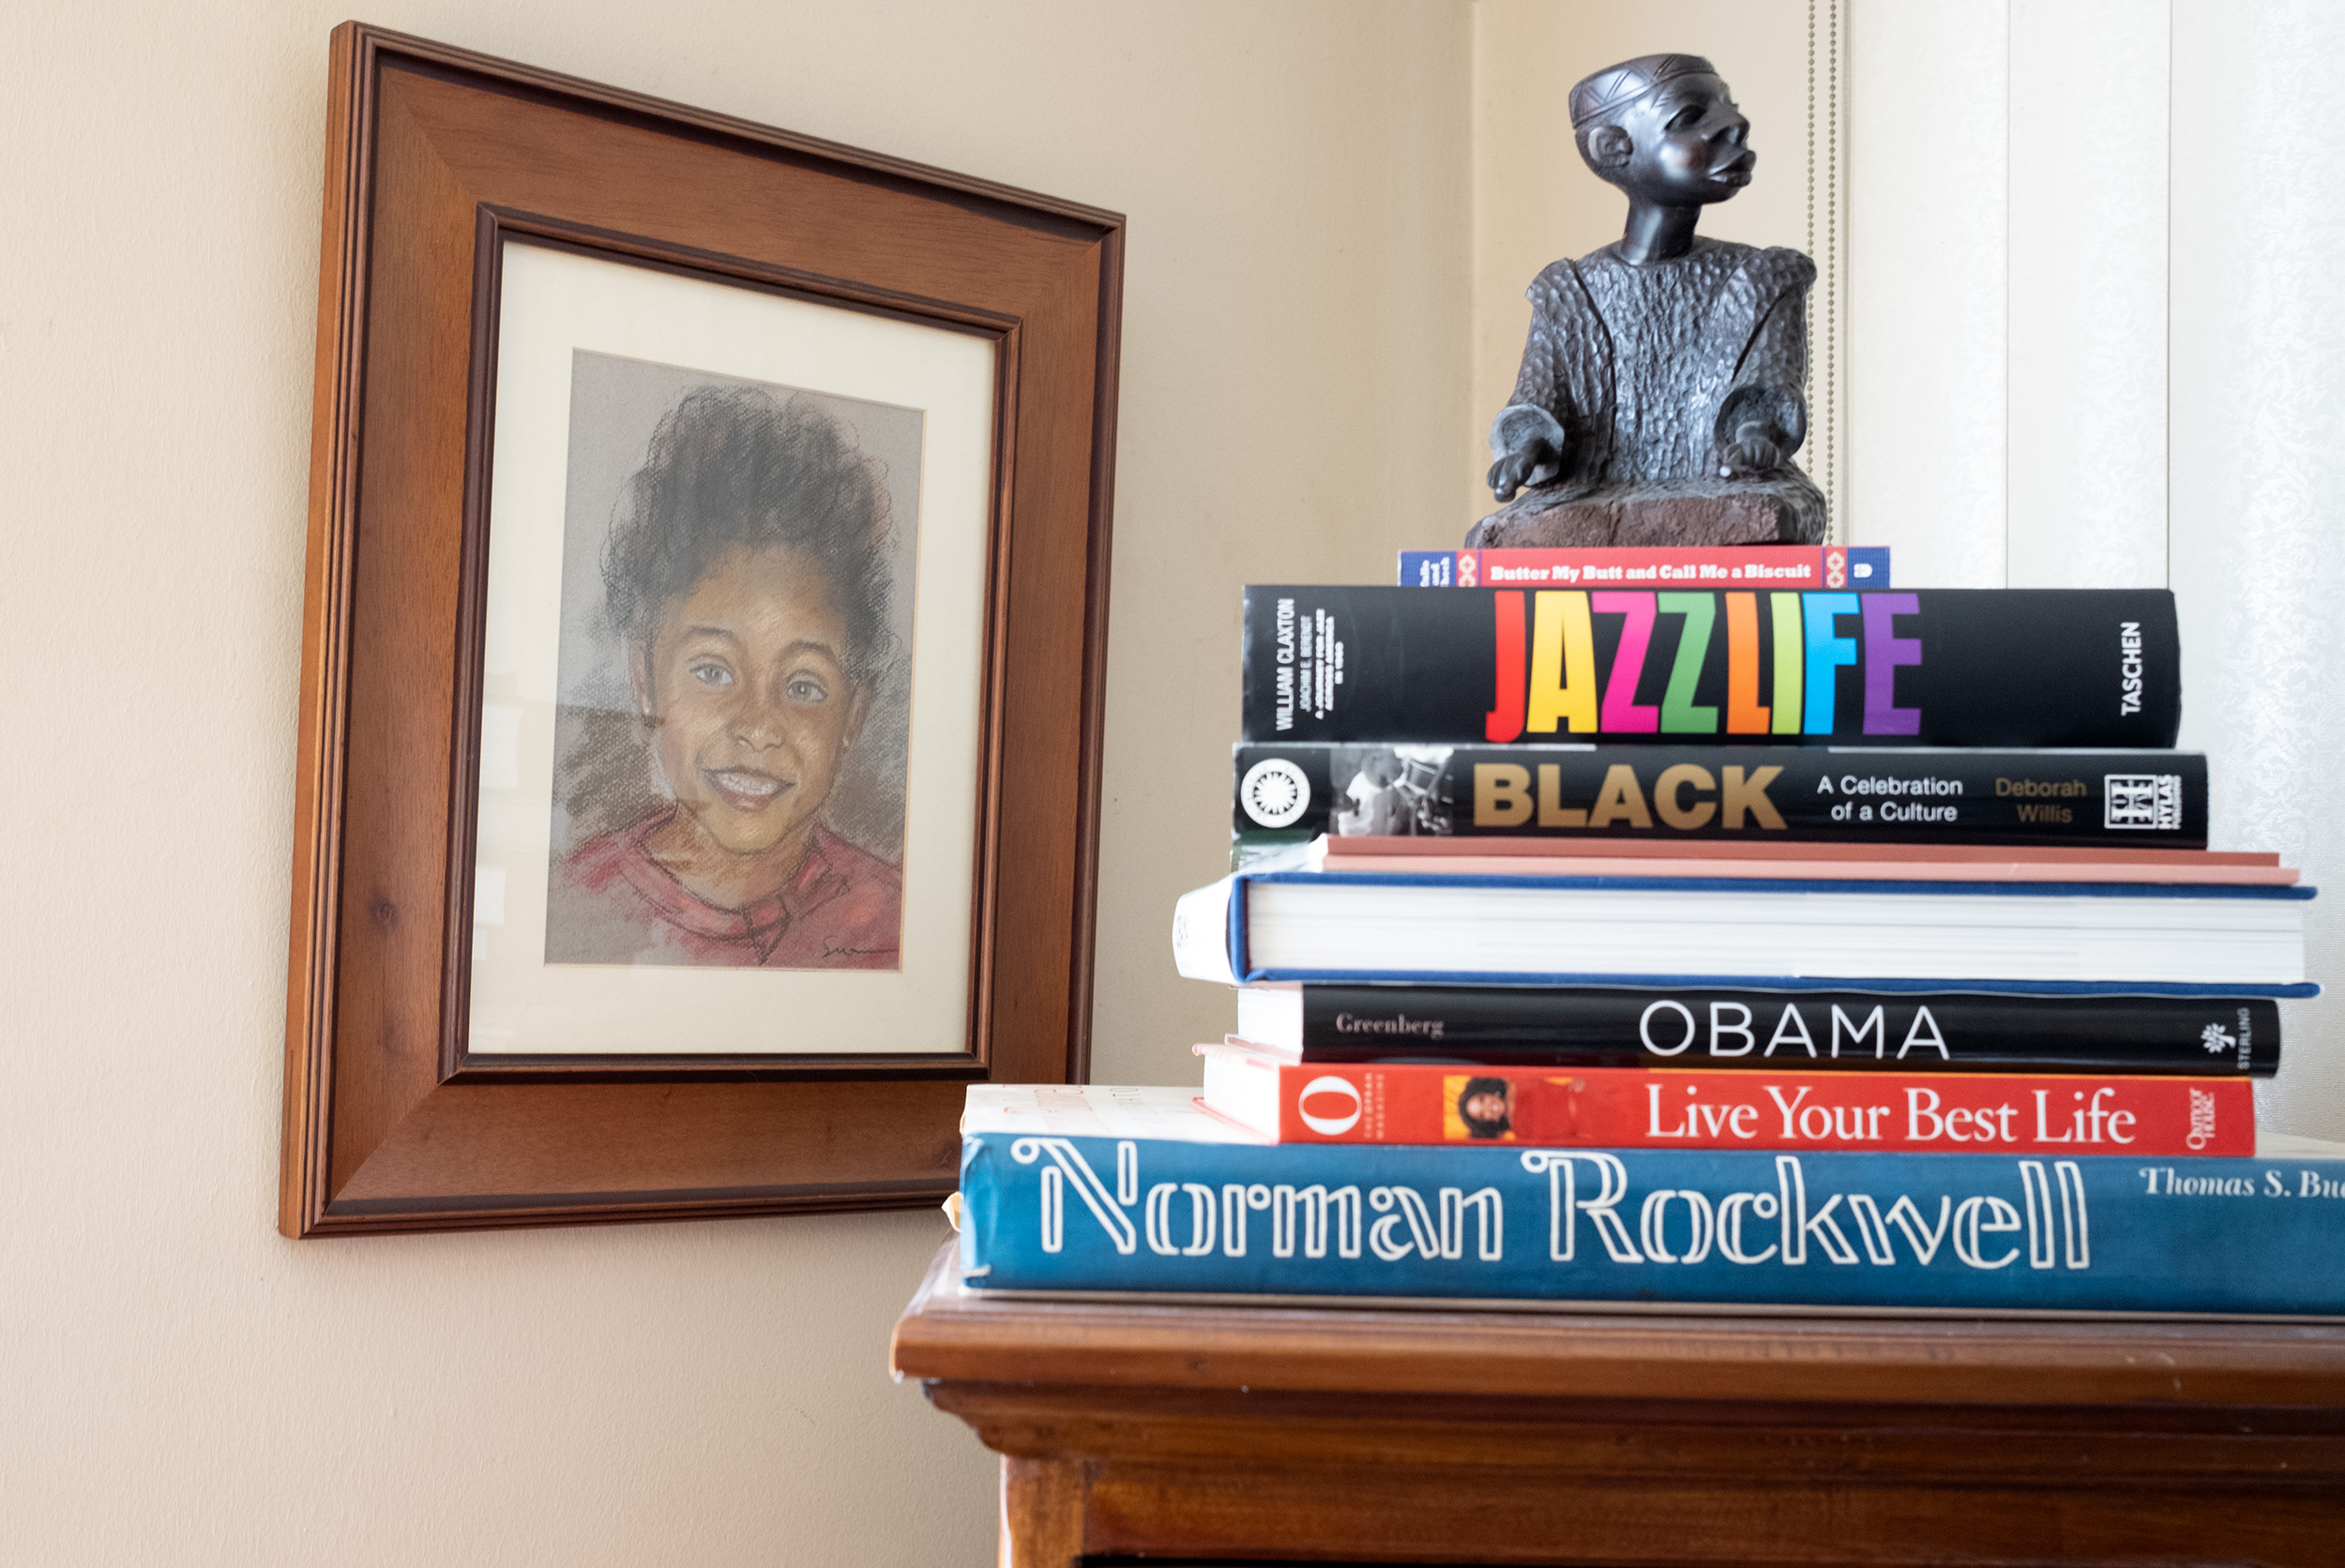 A drawing of a young girl hangs on the wall next to a stack of books and a sculpture on top of a cabinet.